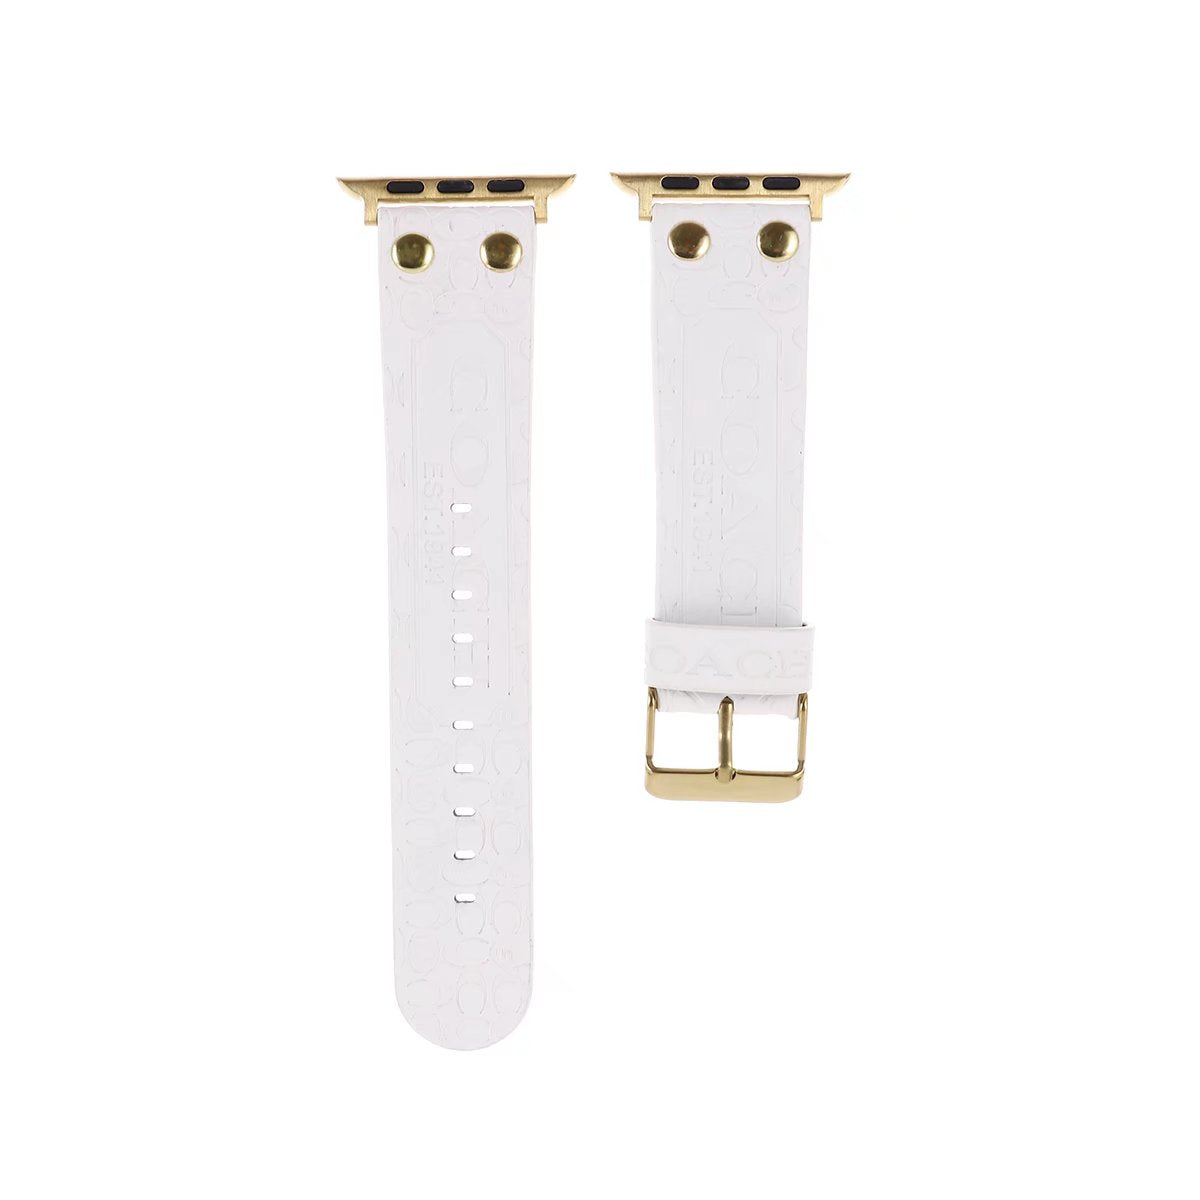 Debossed Coach Watch Band in white